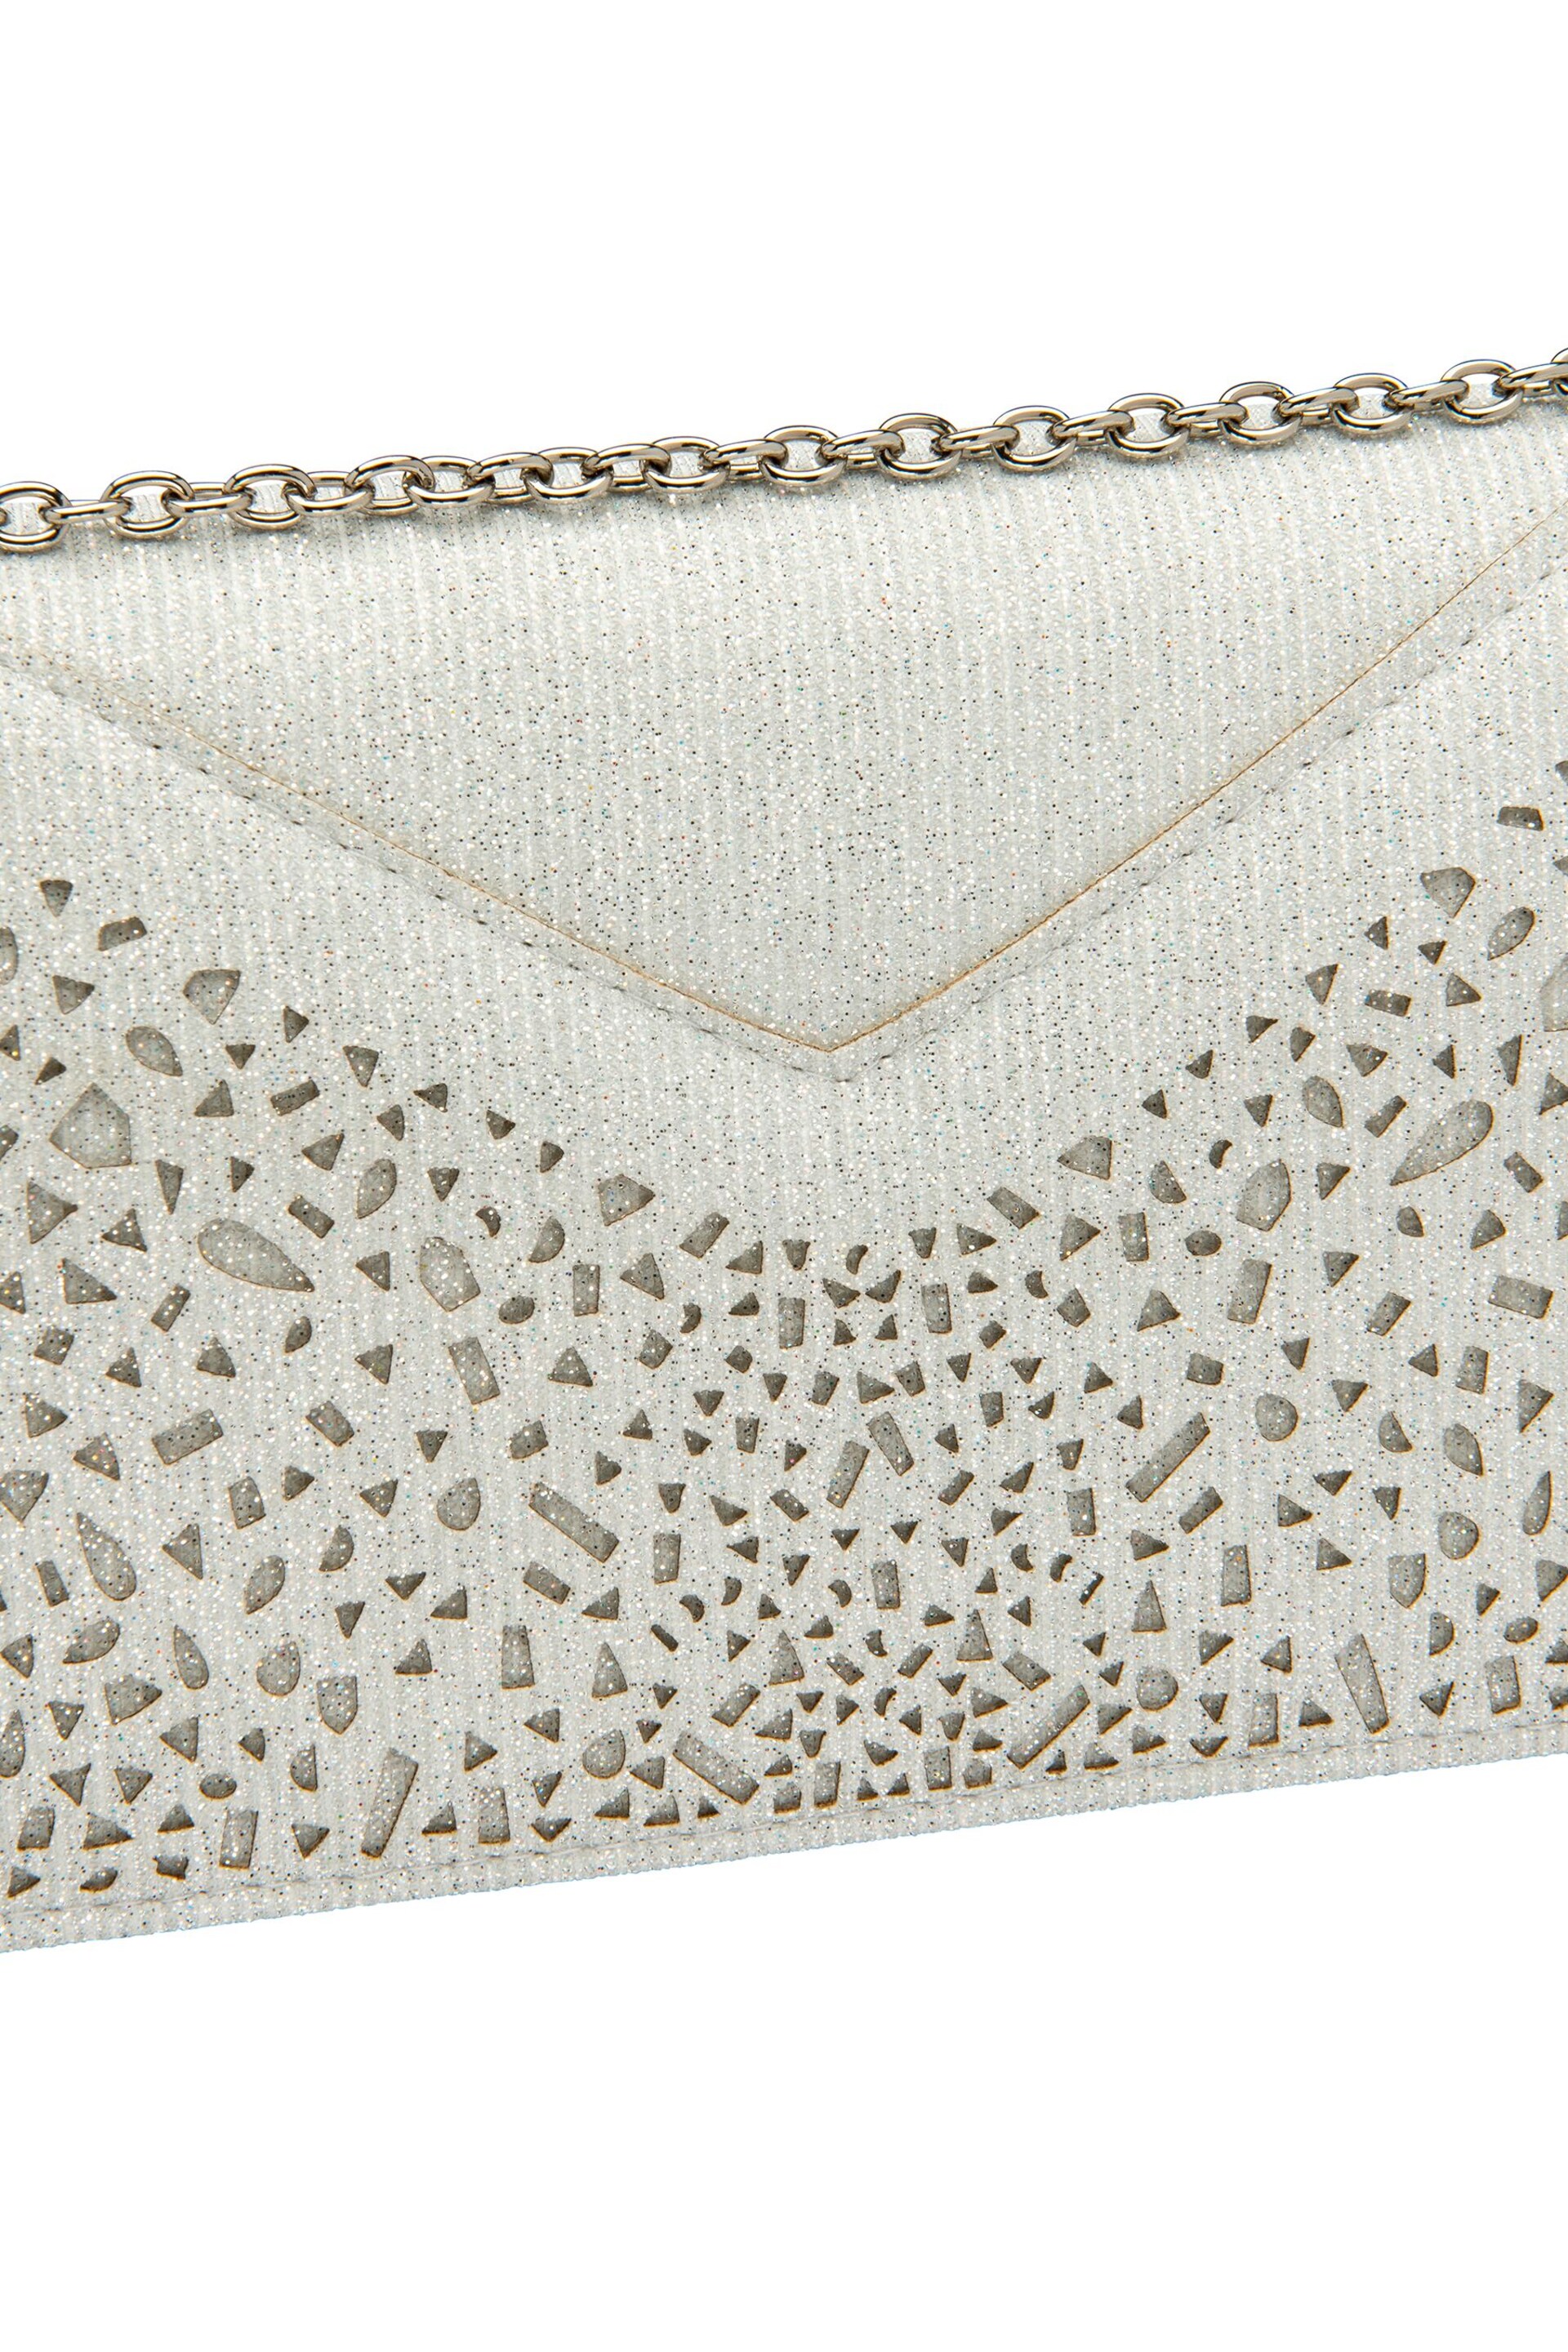 Lotus Cream Clutch Bag with Chain - Image 4 of 4